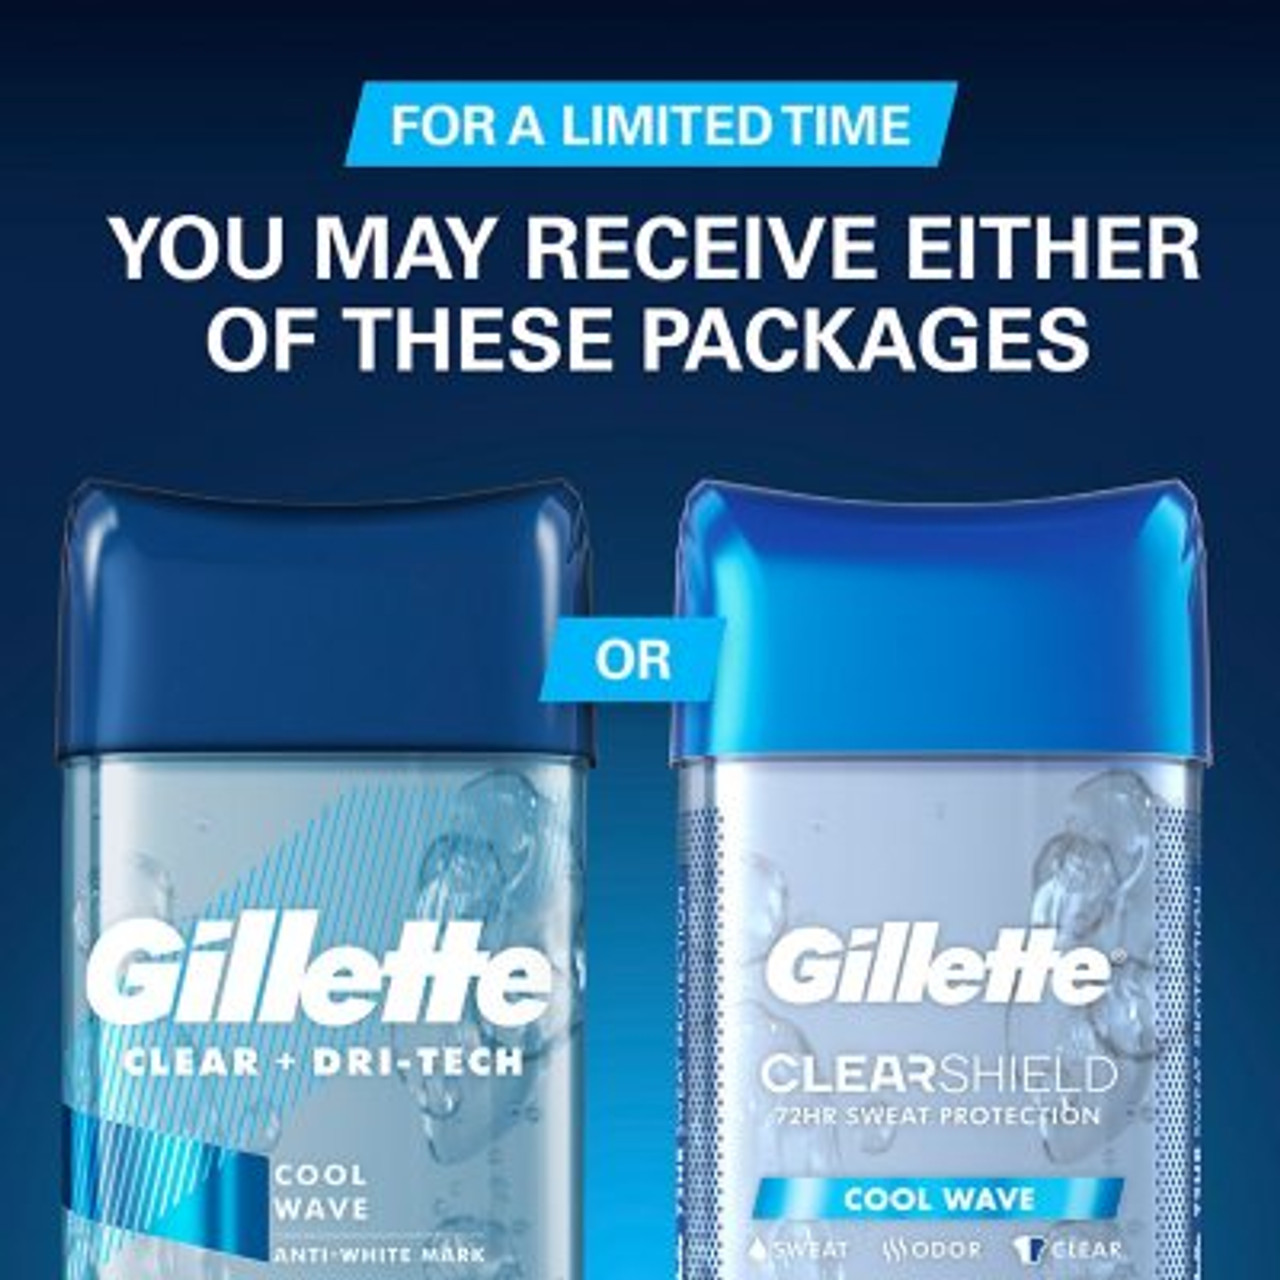 Gillette Cool Wave Clear Gel Men's Antiperspirant and Deodorant (3.8 oz., 5 pk.) - [From 67.00 - Choose pk Qty ] - *Ships from Miami